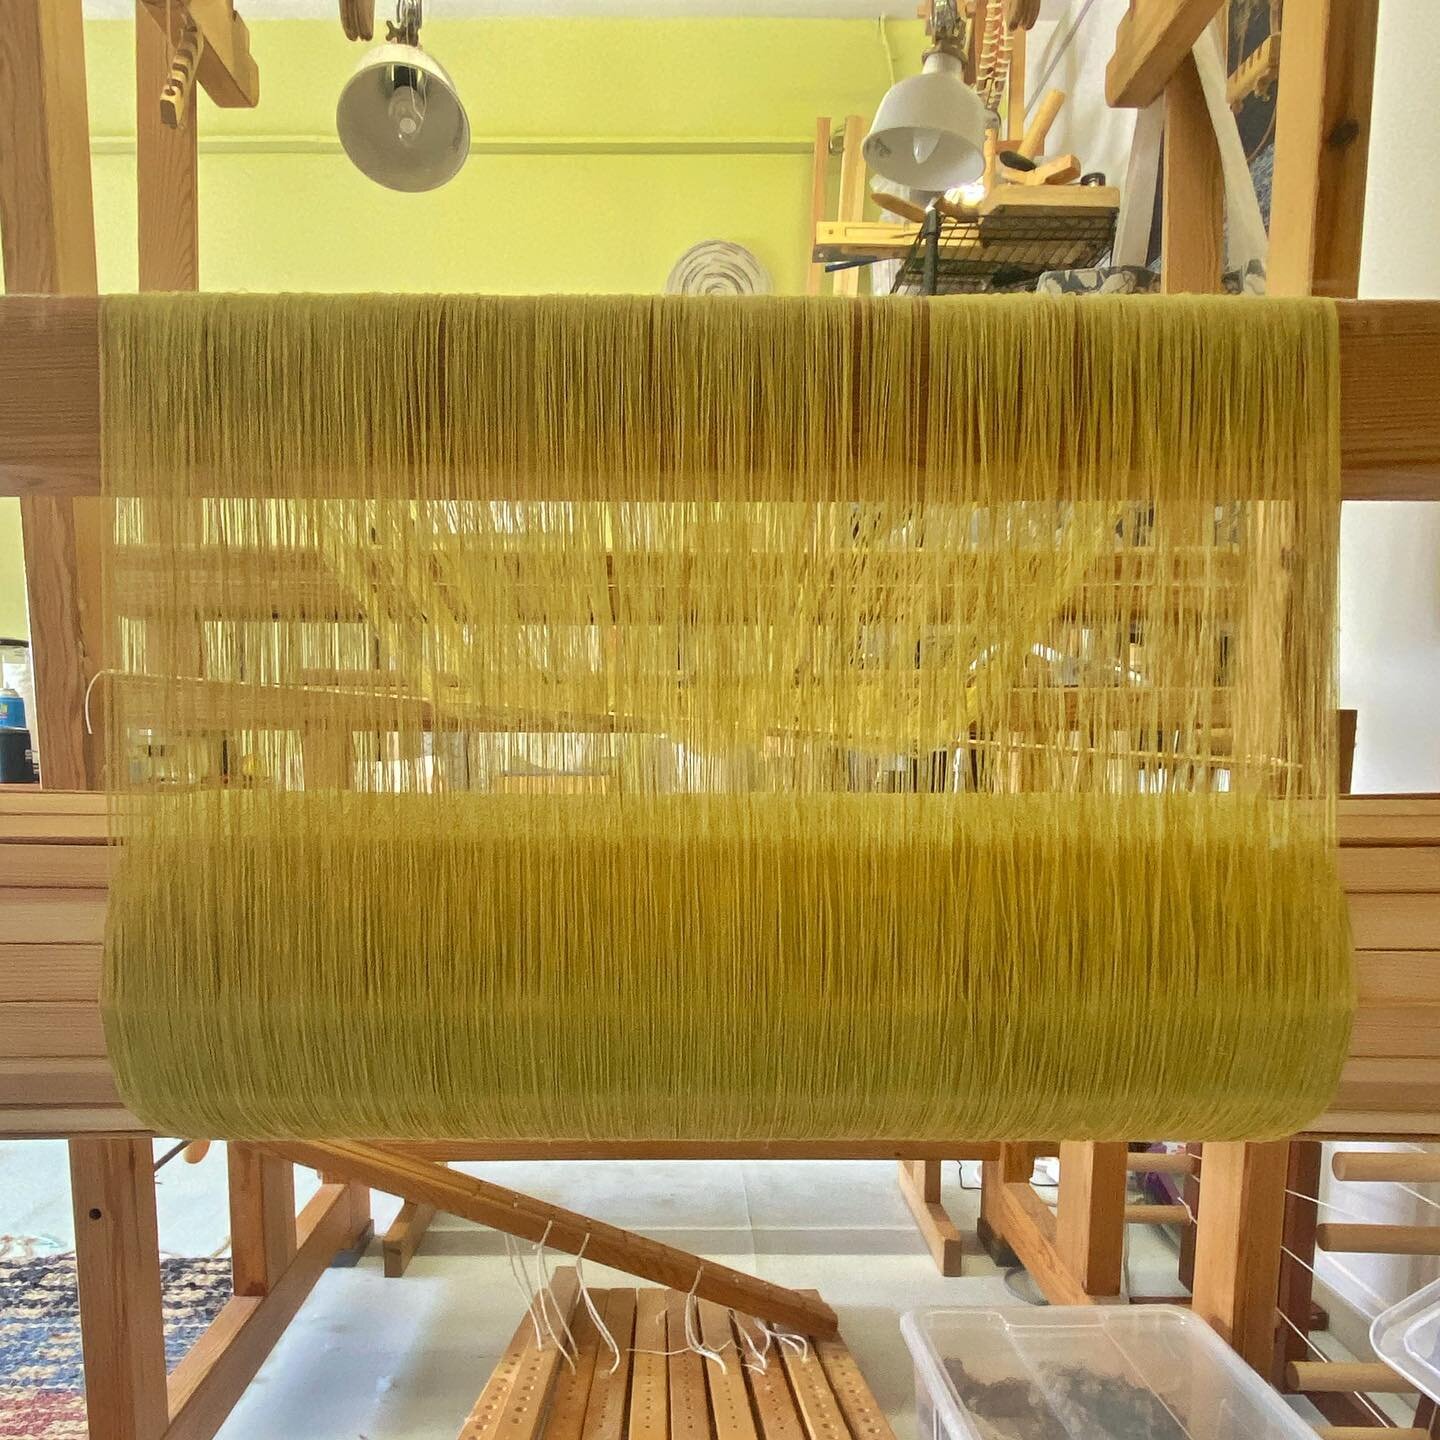 It there much more satisfying than a firm, just-beamed, fine linen warp? At forty-eight ends per inch, this 16/1 linen put up a bit of a fight. It is only my second time using a warping trapeze. Thank you @duellingrabbitshandweaving for your advice a